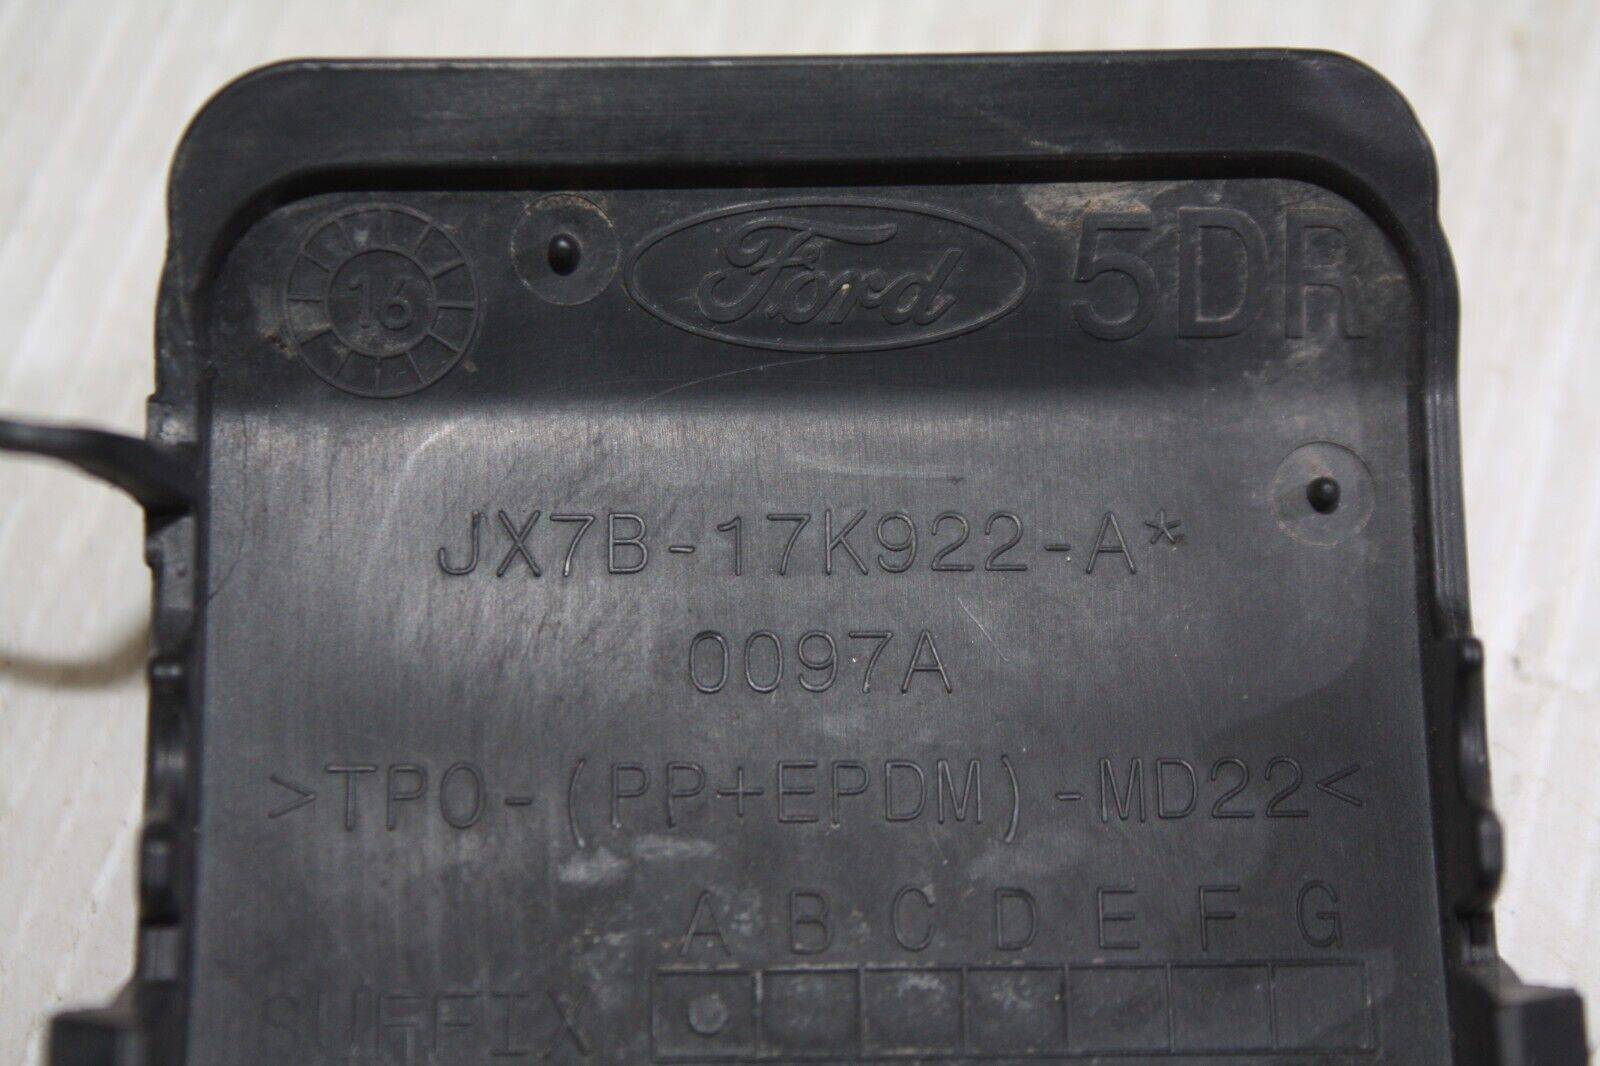 Ford-Focus-Rear-Bumper-Tow-Cover-2018-to-2022-JX7B-17K922-A-Genuine-175980863236-7